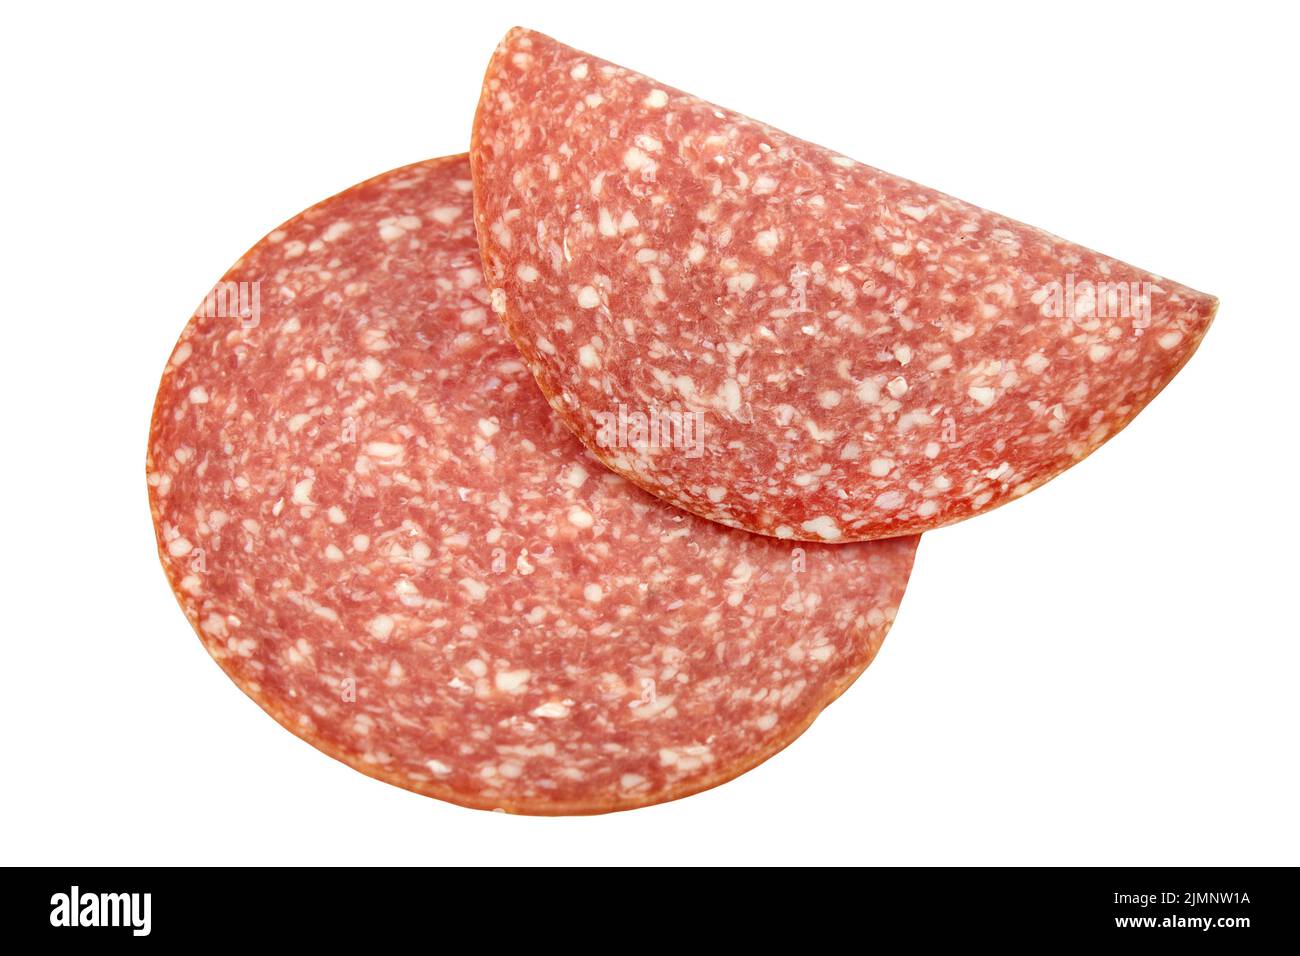 2 slices of Cervelat sausage cold cut isolated on against background Stock Photo